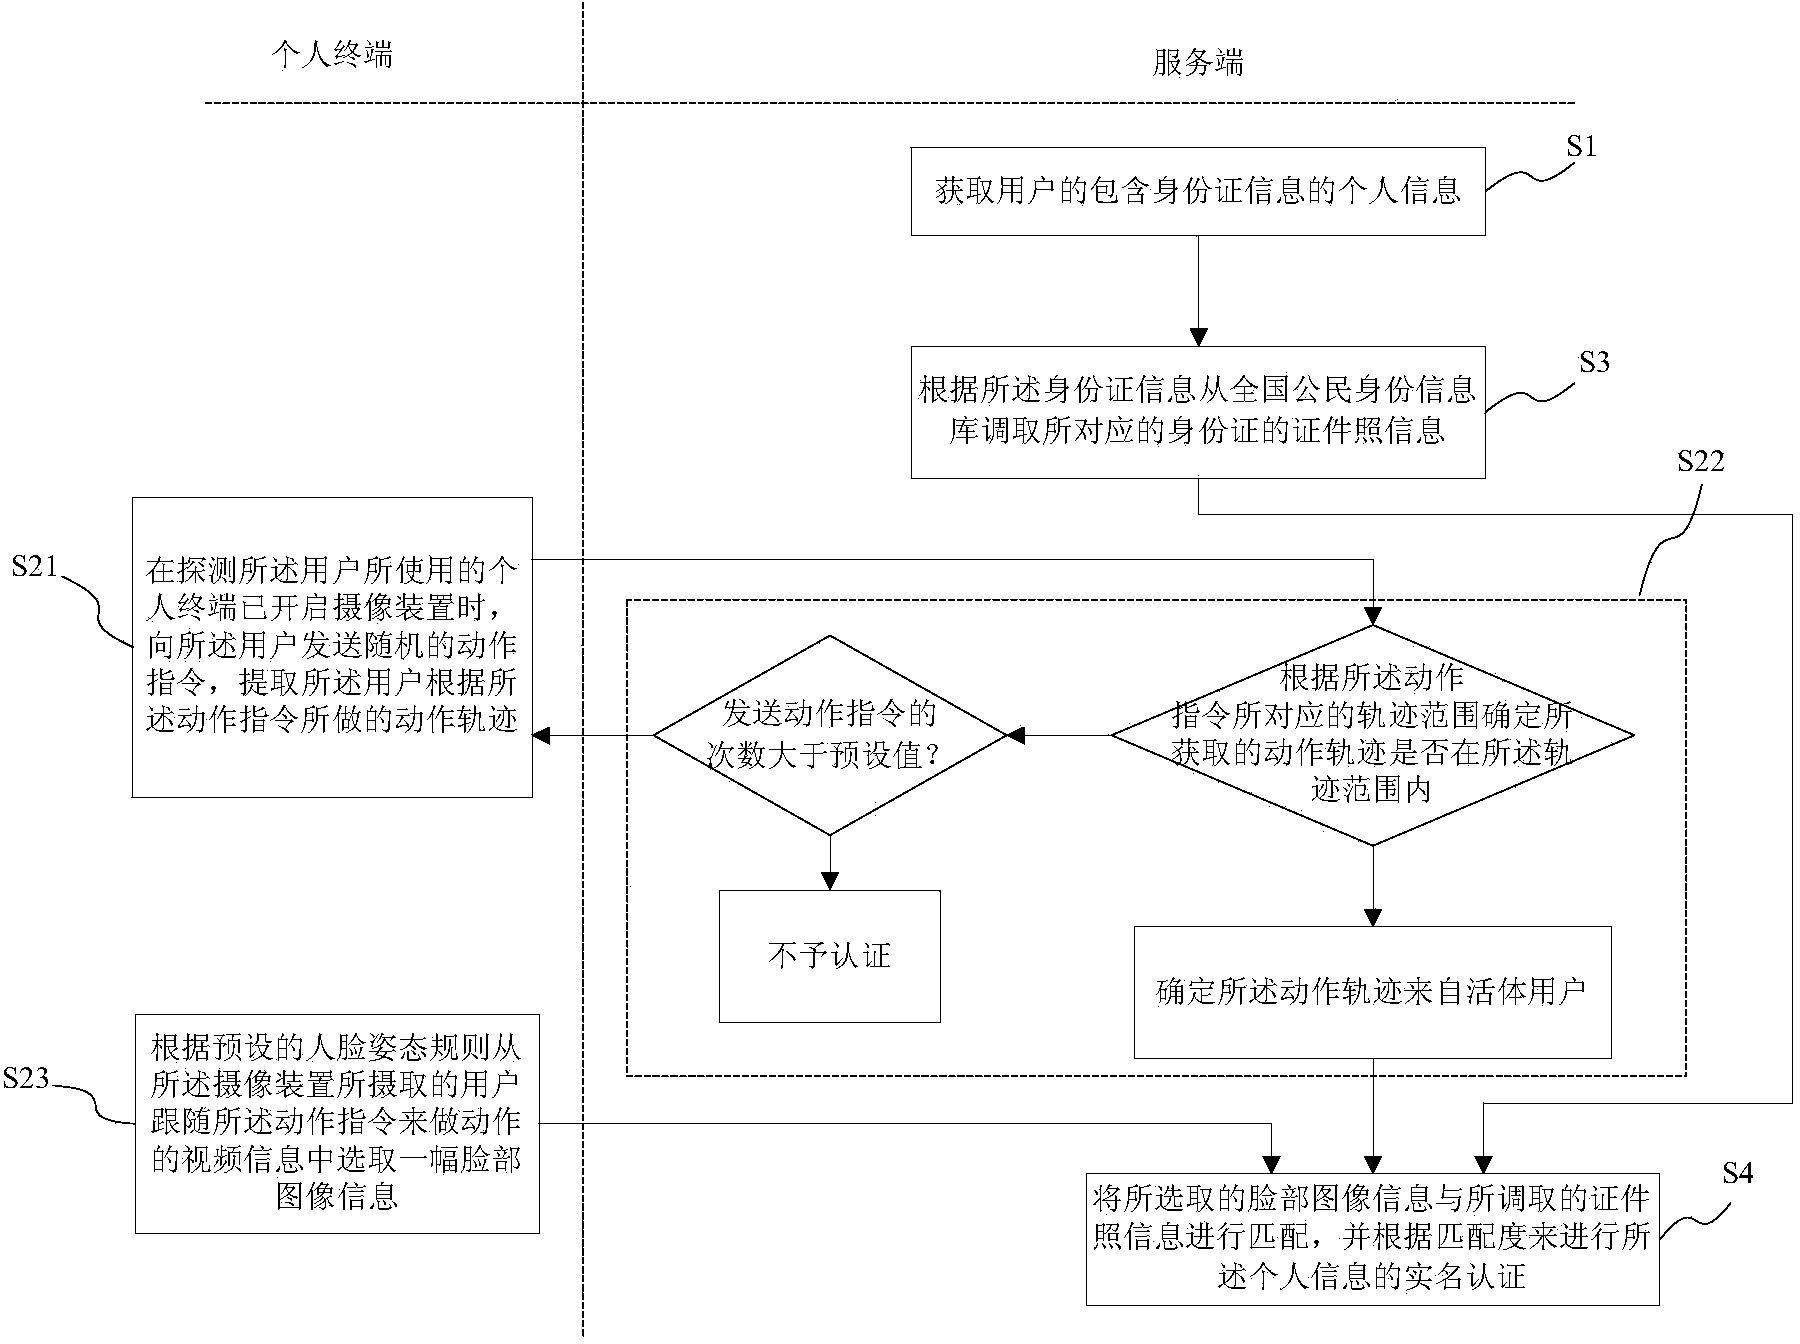 Method and system for real-name authentication based on face recognition